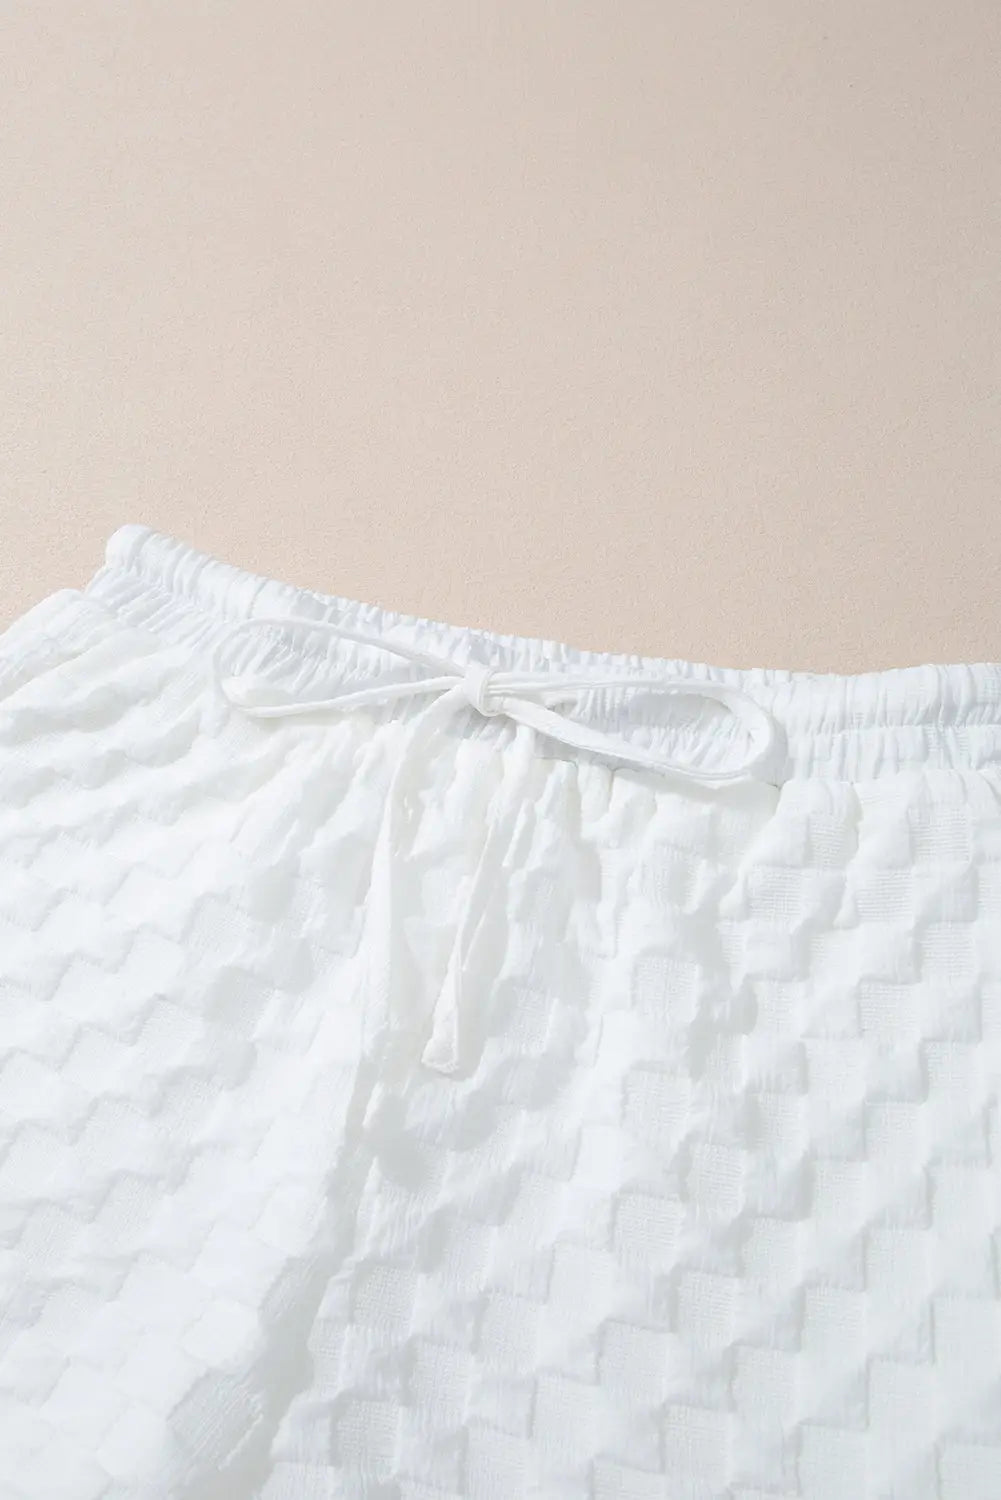 White textured top and shorts set - two piece sets/short sets